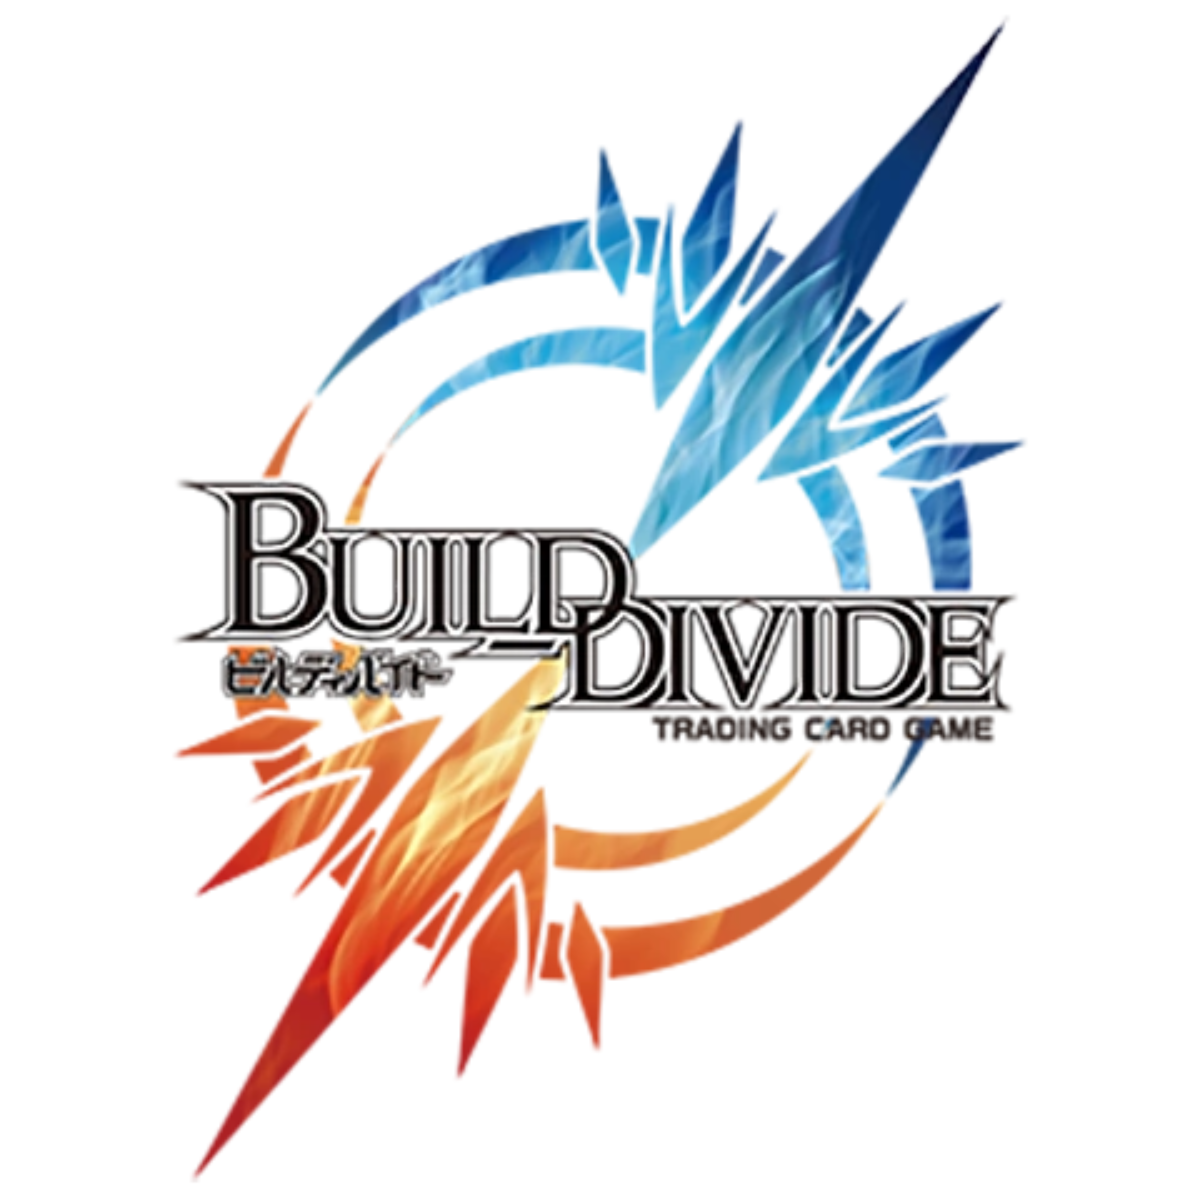 Build Divide -Bright- Start Deck "Bocchi The Rock" (Japanese)-Aniplex-Ace Cards & Collectibles